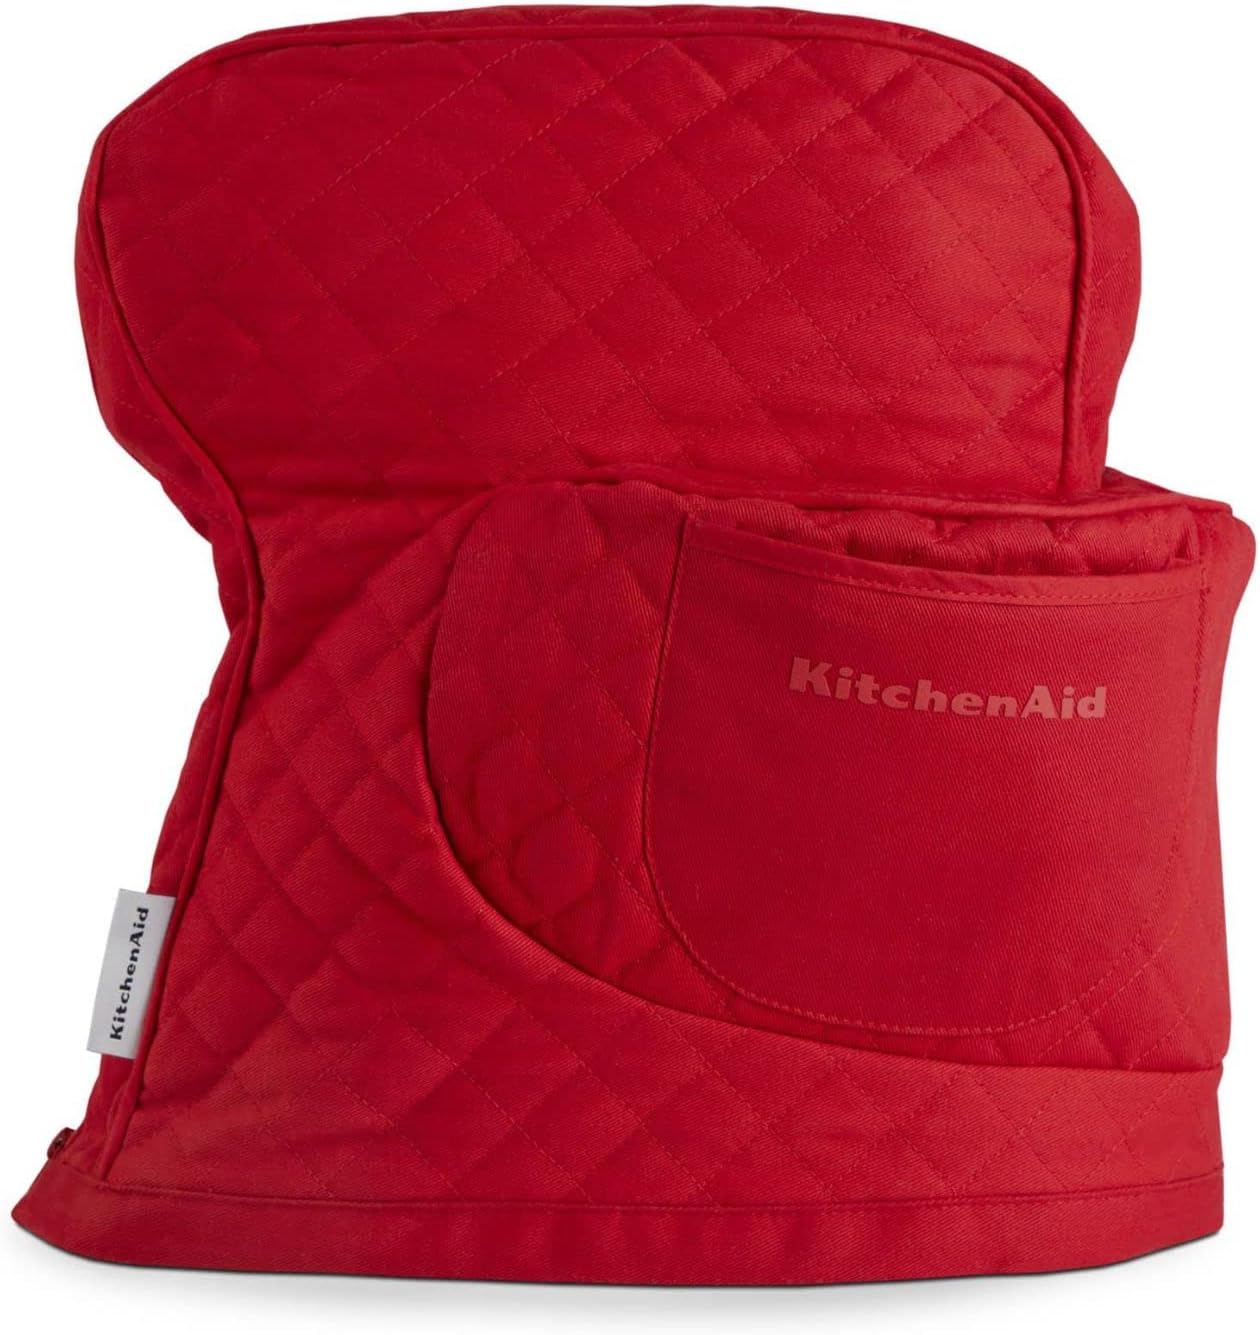 Kitchenaid 14.5 \ "x 18 \" Passion red quilted blender cover